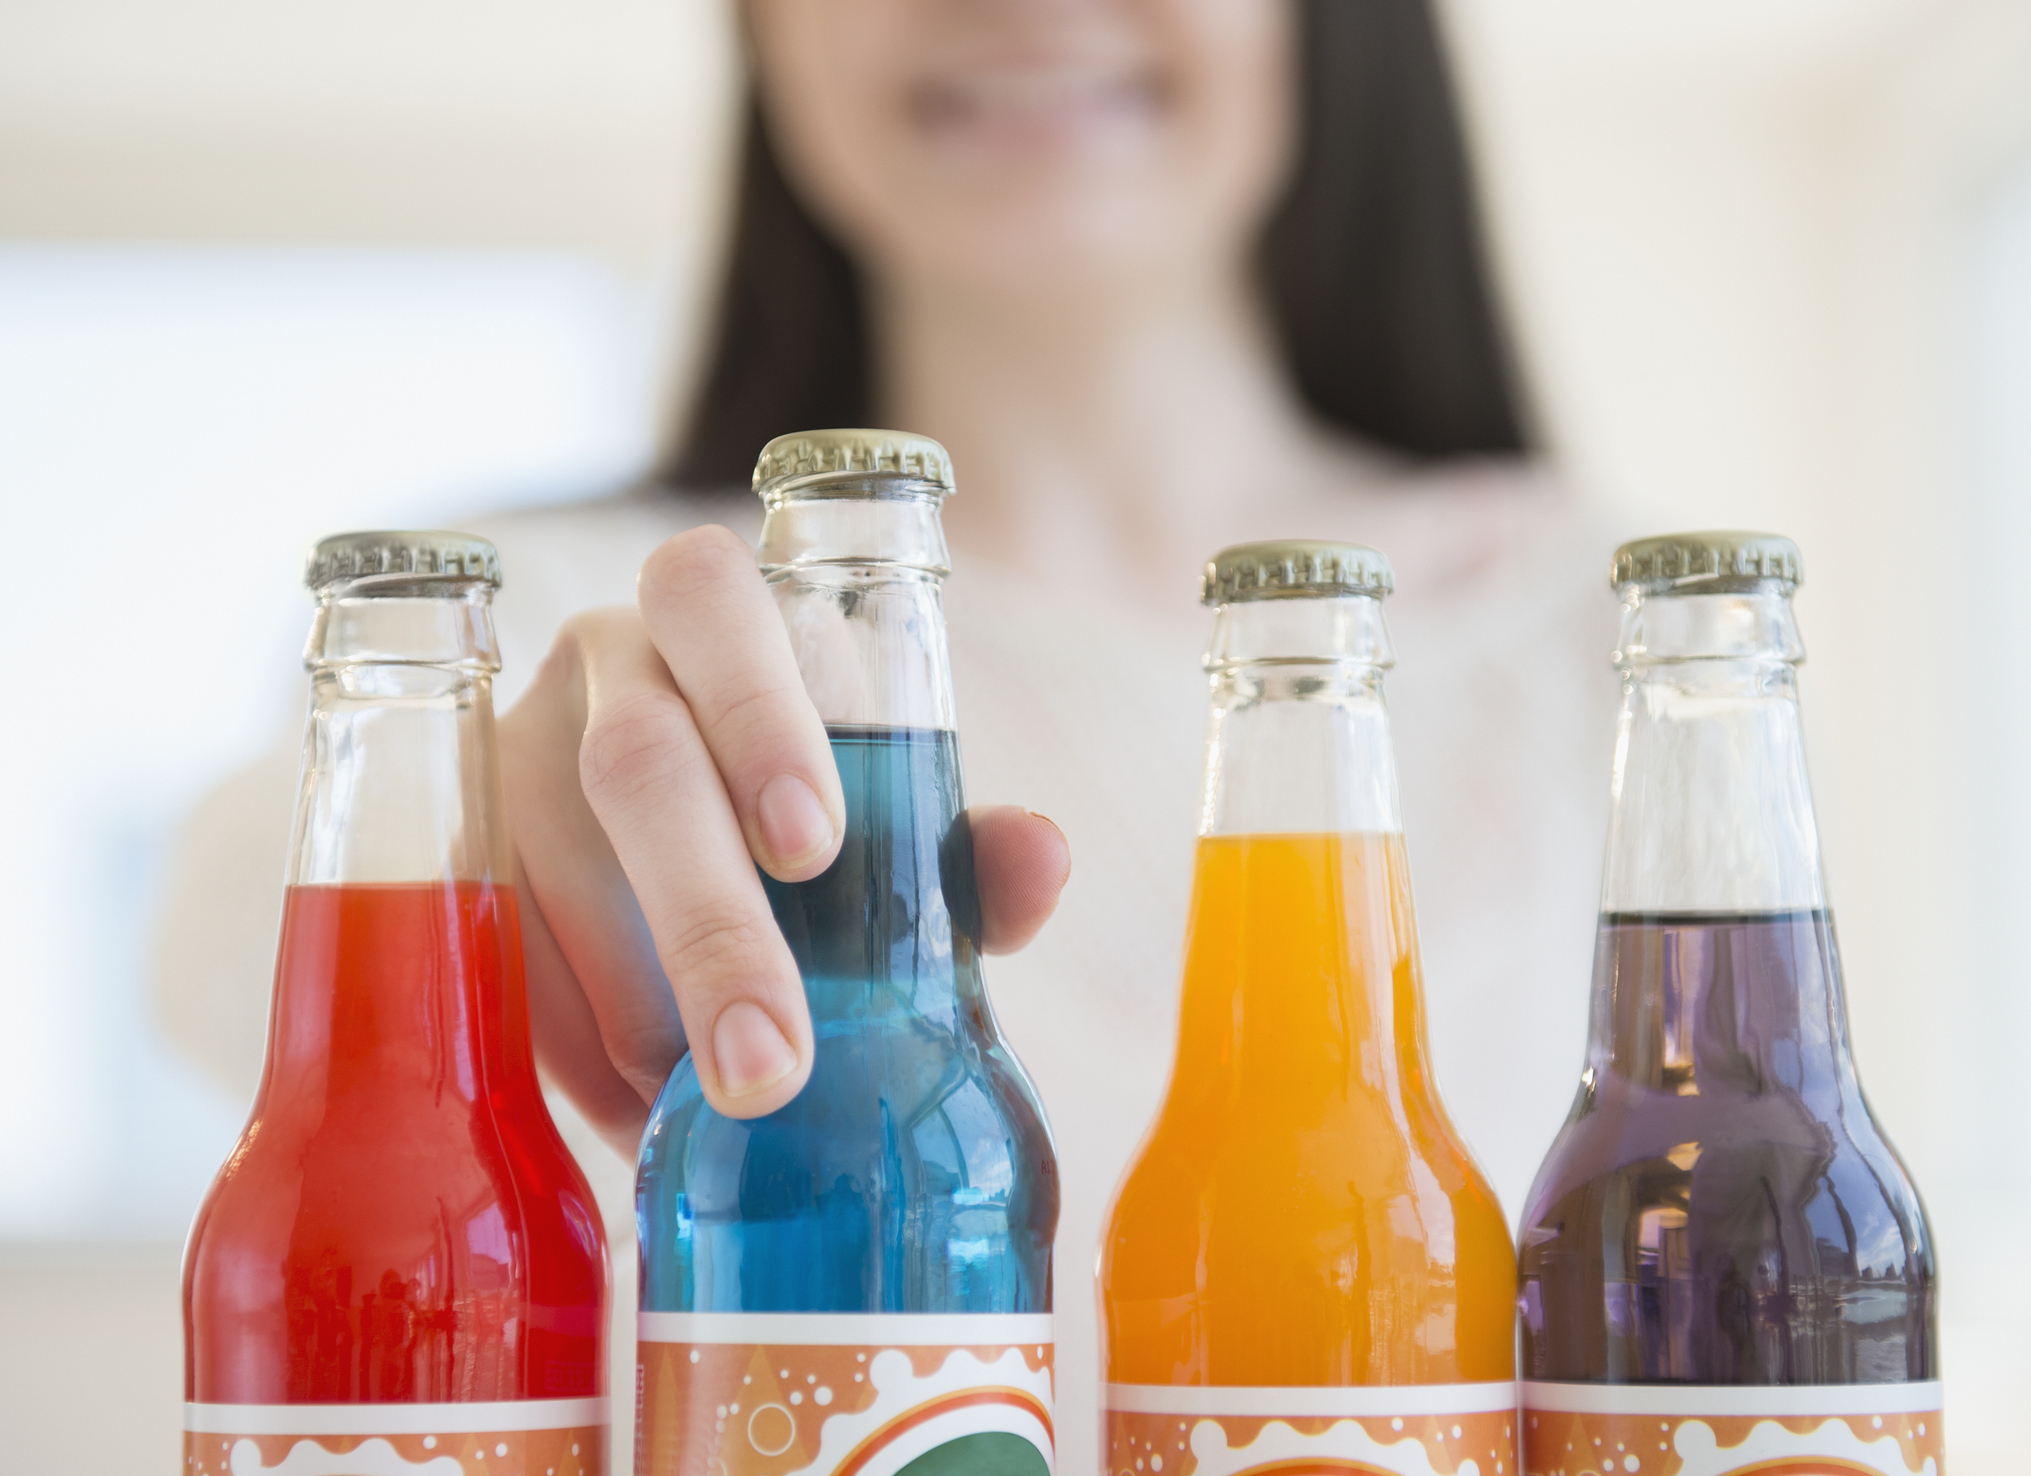 Person selecting one of four colorful soda bottles. Article context: Food